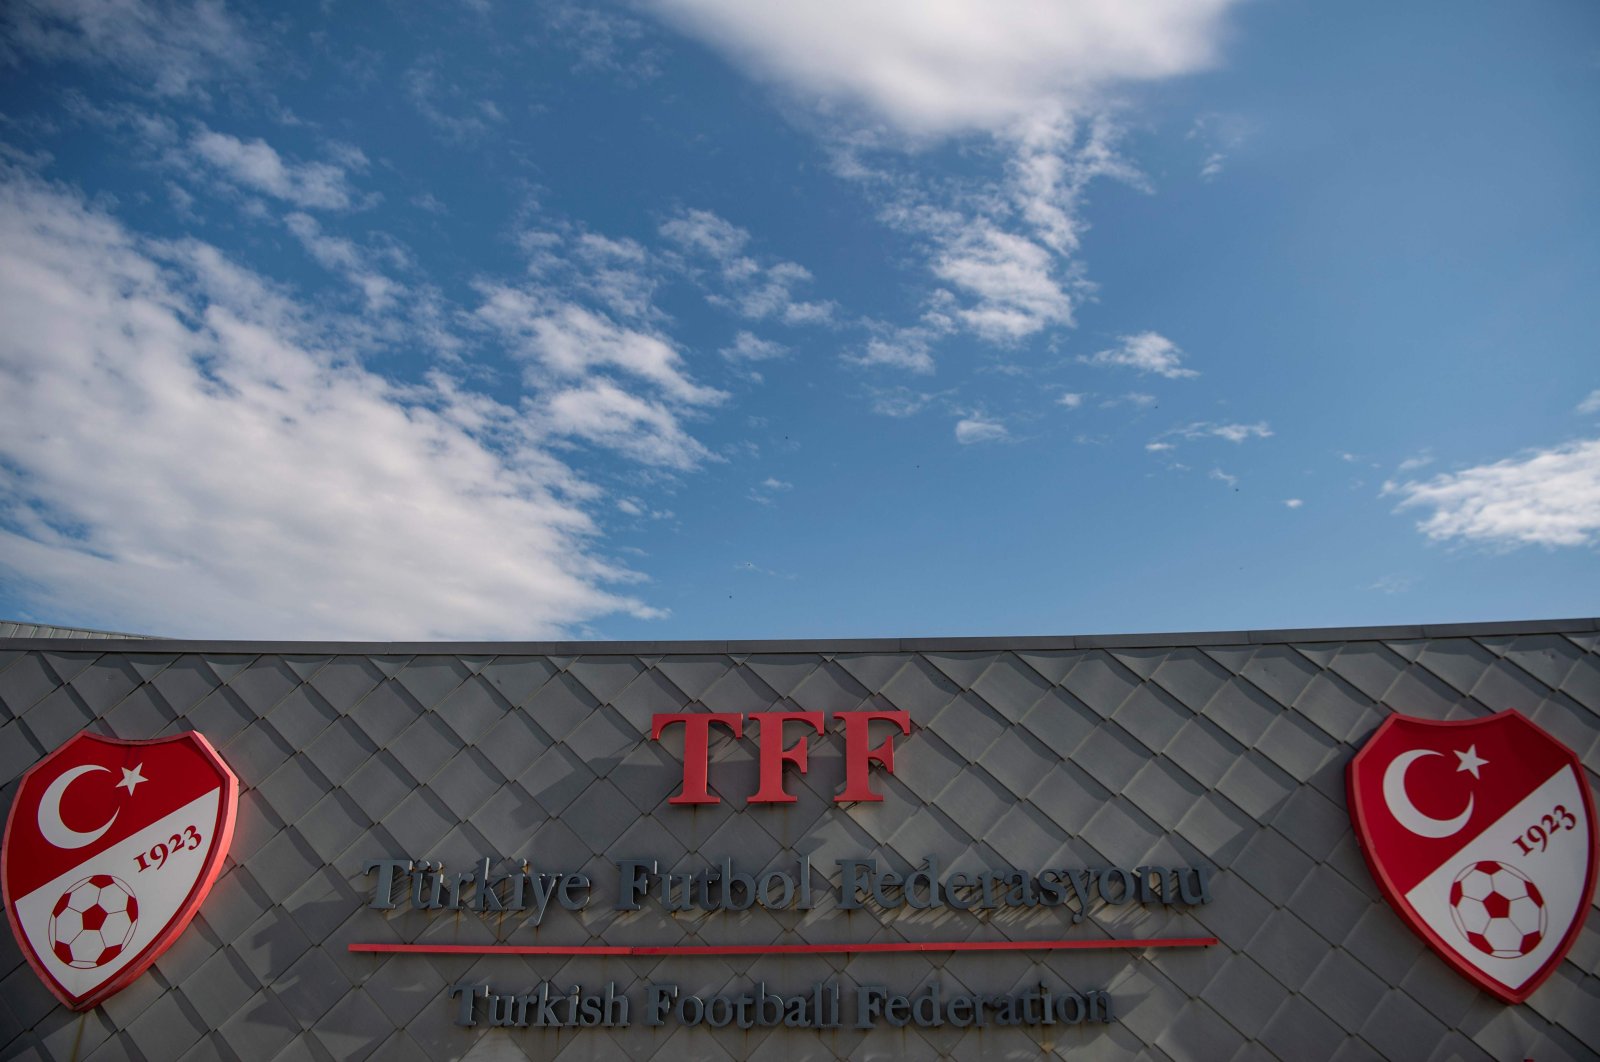 Logo of Turkish Football Federation (TFF) at the entrance of the organization's headquarters, Istanbul, Turkey, May 6, 2020. (AFP Photo)